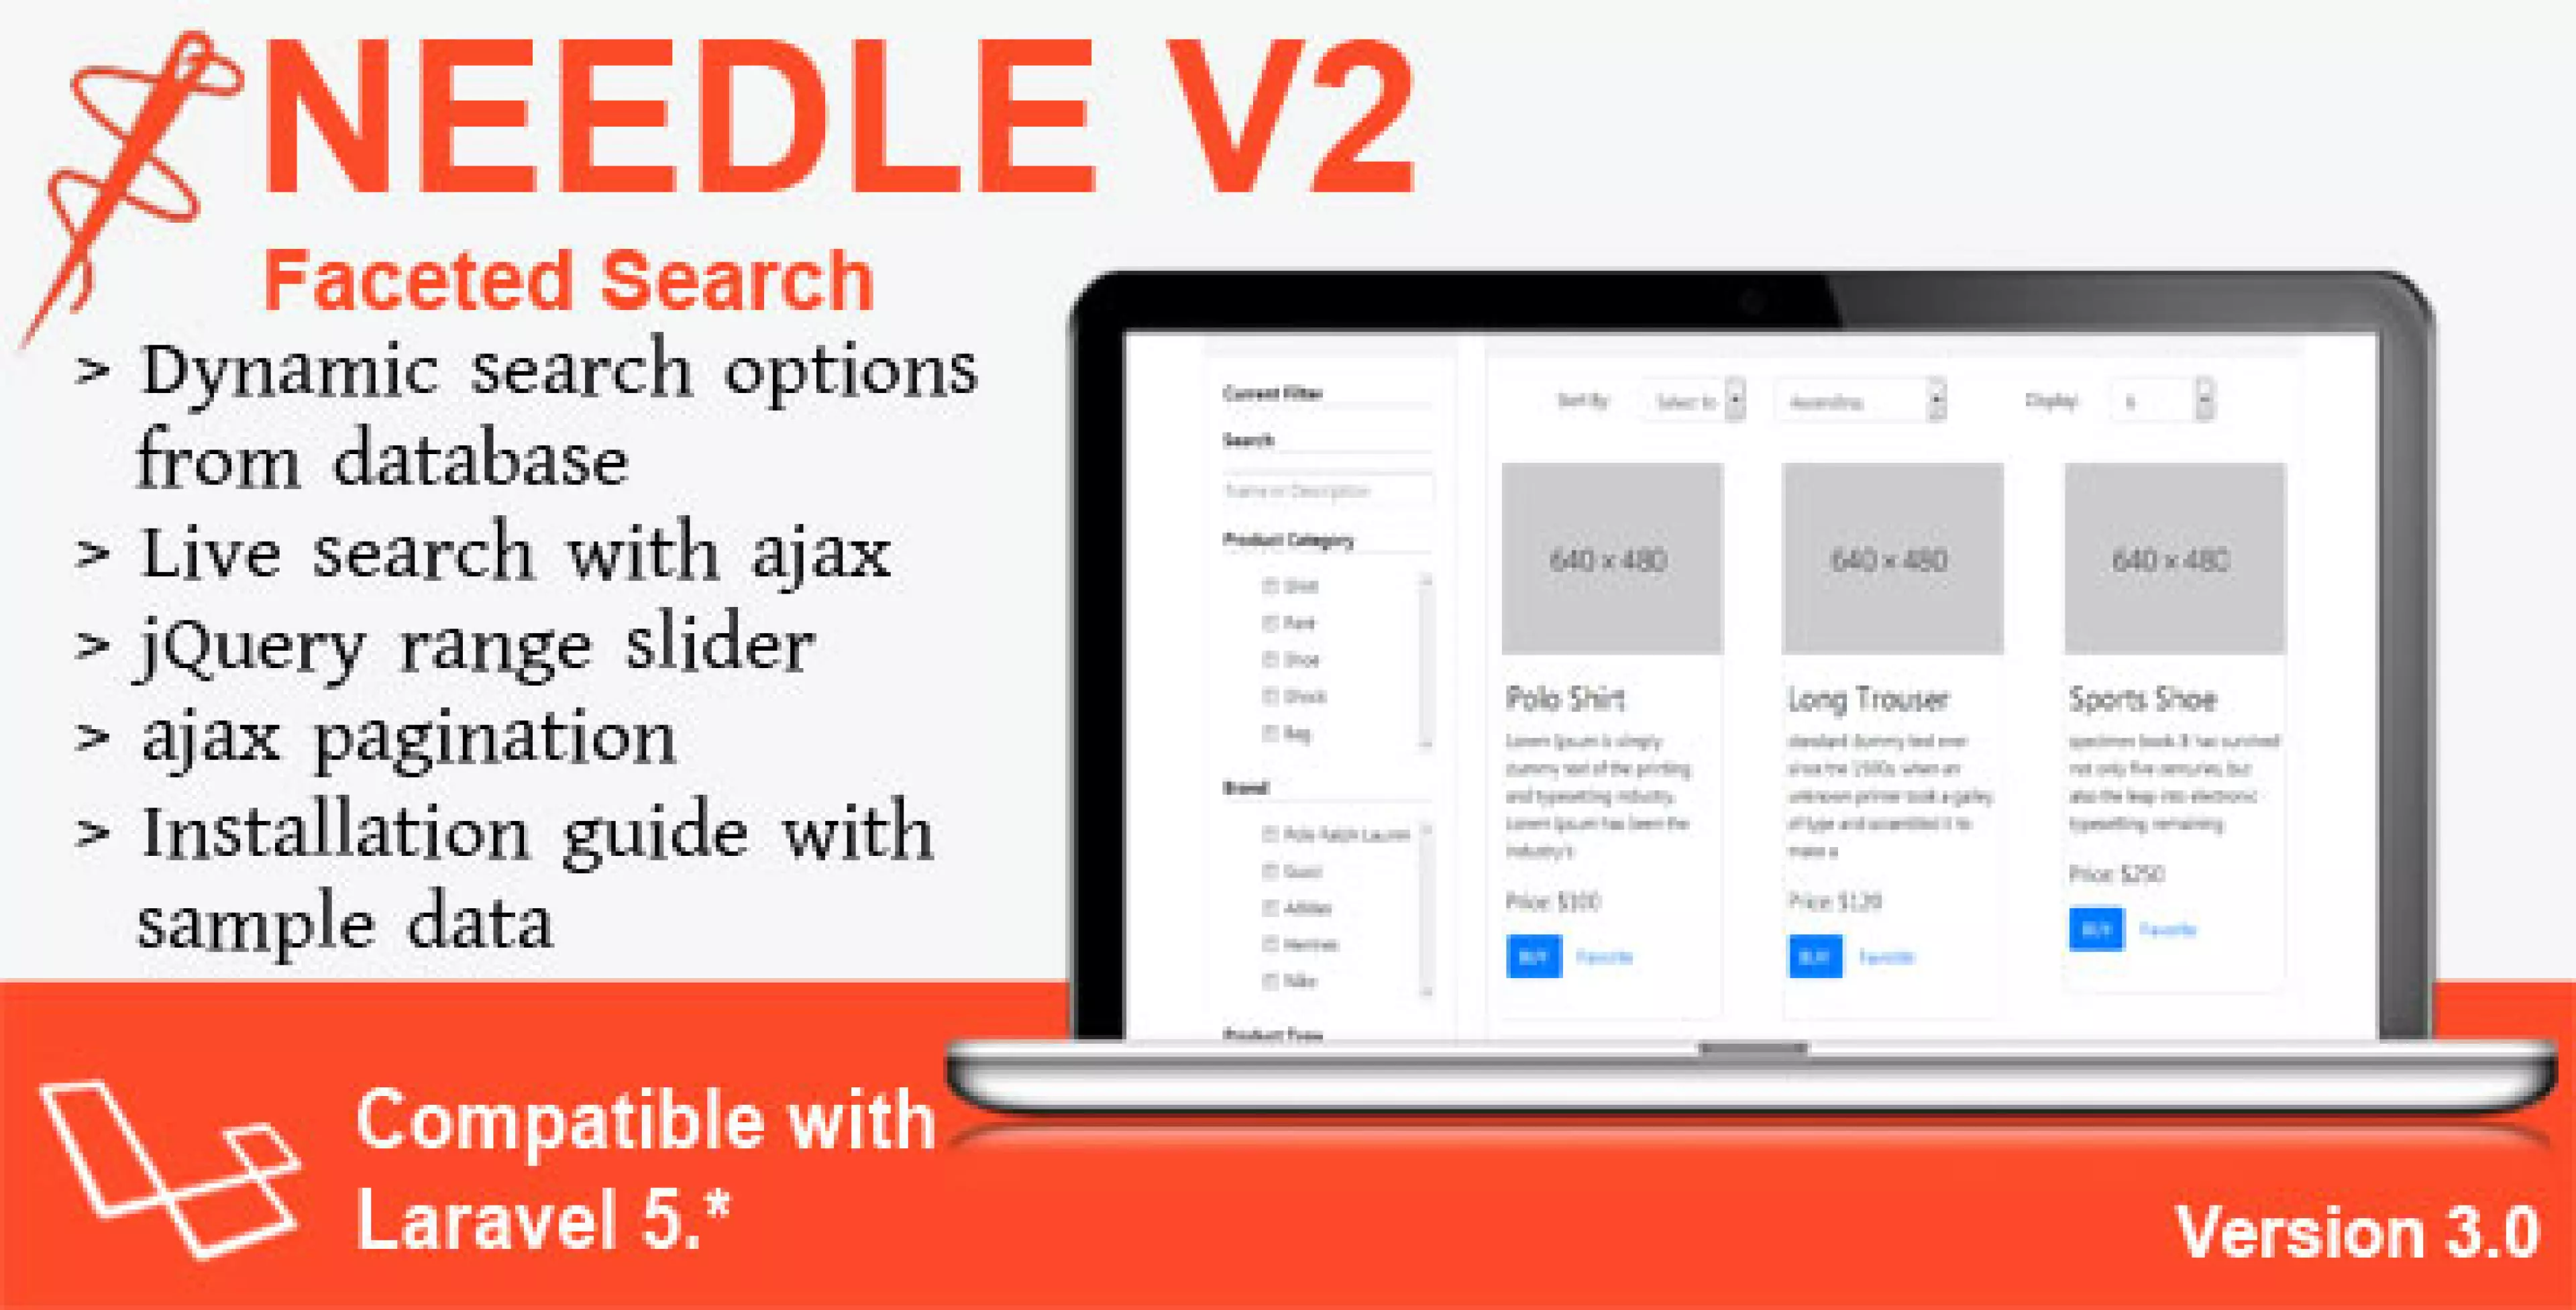 Needle V2 - Laravel Faceted Search